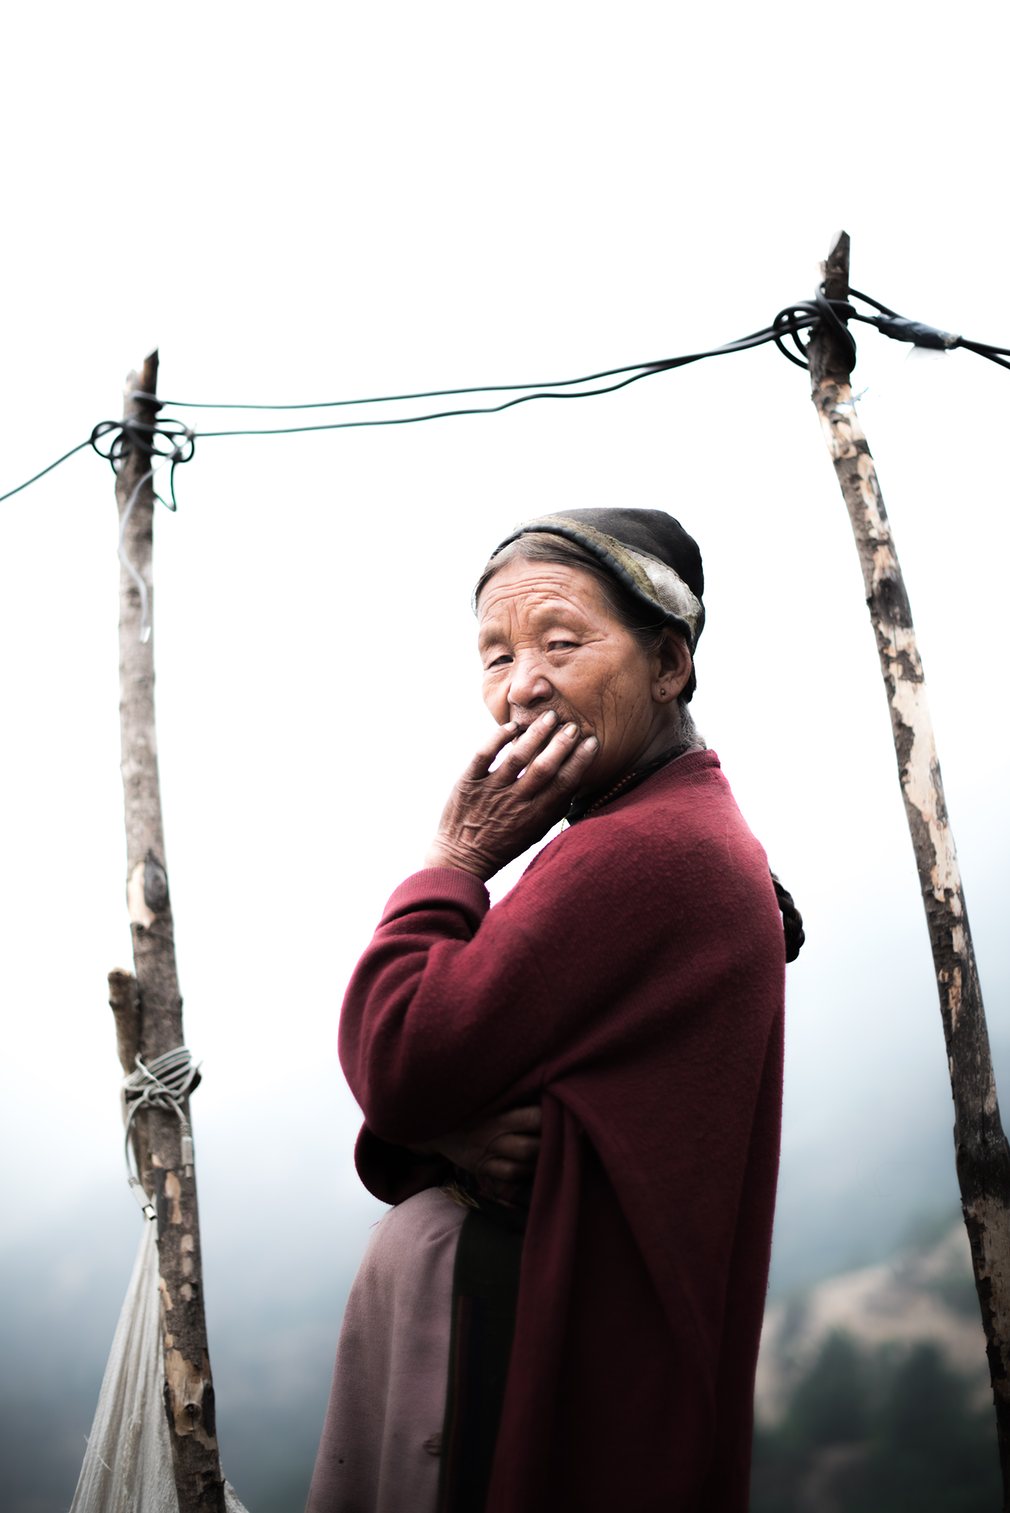 Like many others in the Langtang valley, Nyima Gyalmu Tamang from Bhanjyangaon has been living in temporary structures made of tarpaulin, corrugated iron and plastic sheets. She has no income and â€“ as a widow who owns no land â€“ she is ineligible for government support